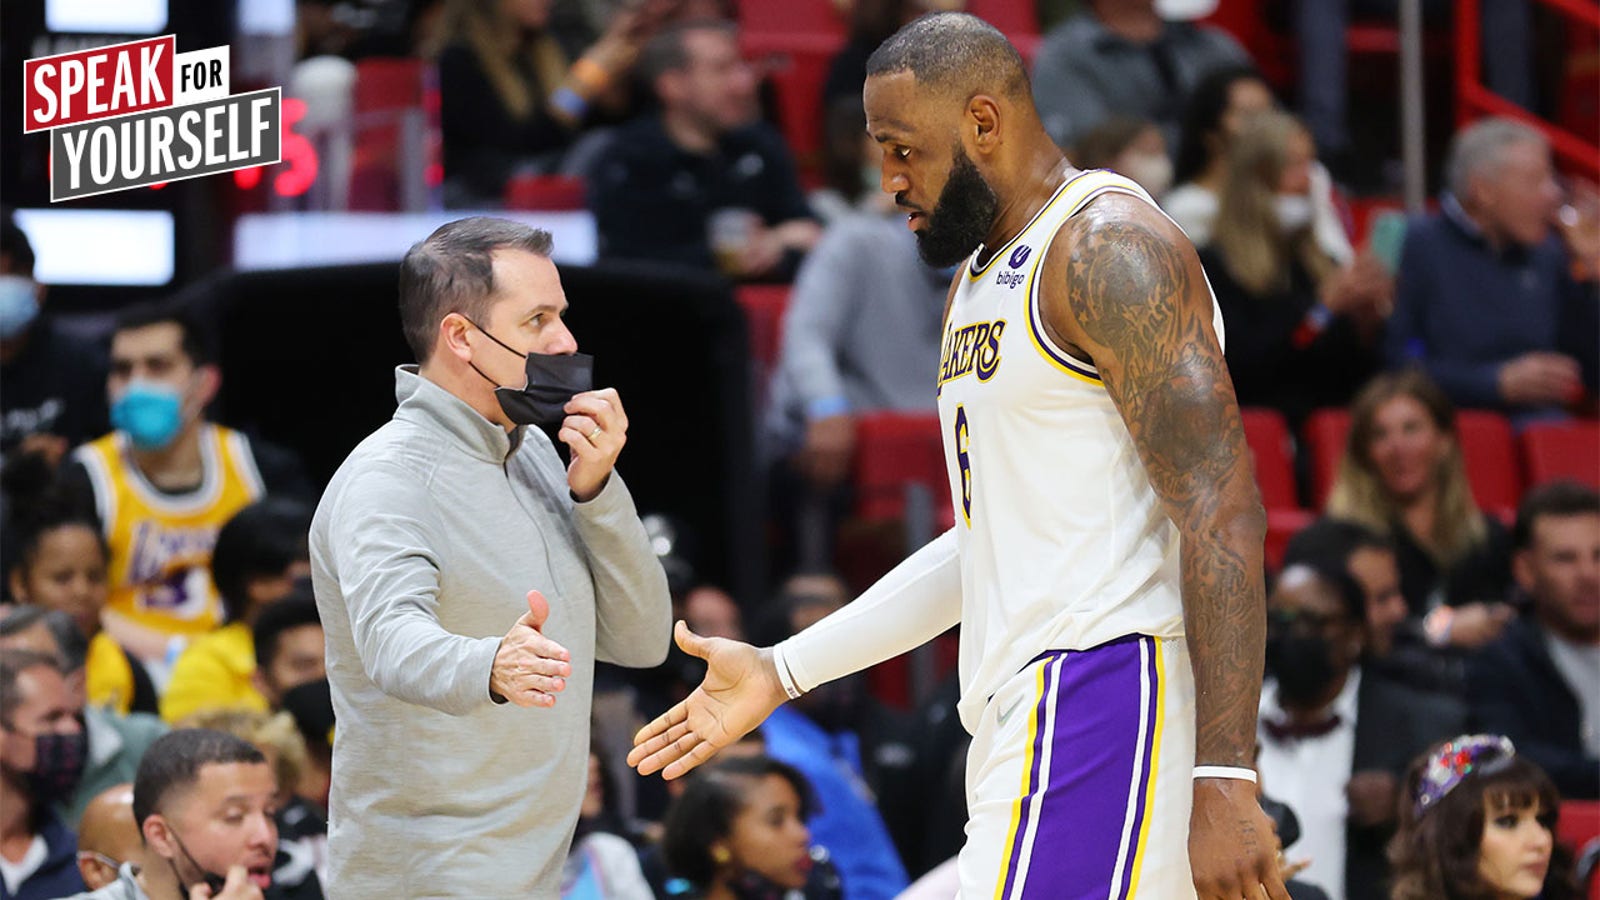 Frank Vogel, not LeBron, is at fault for Lakers' poor season